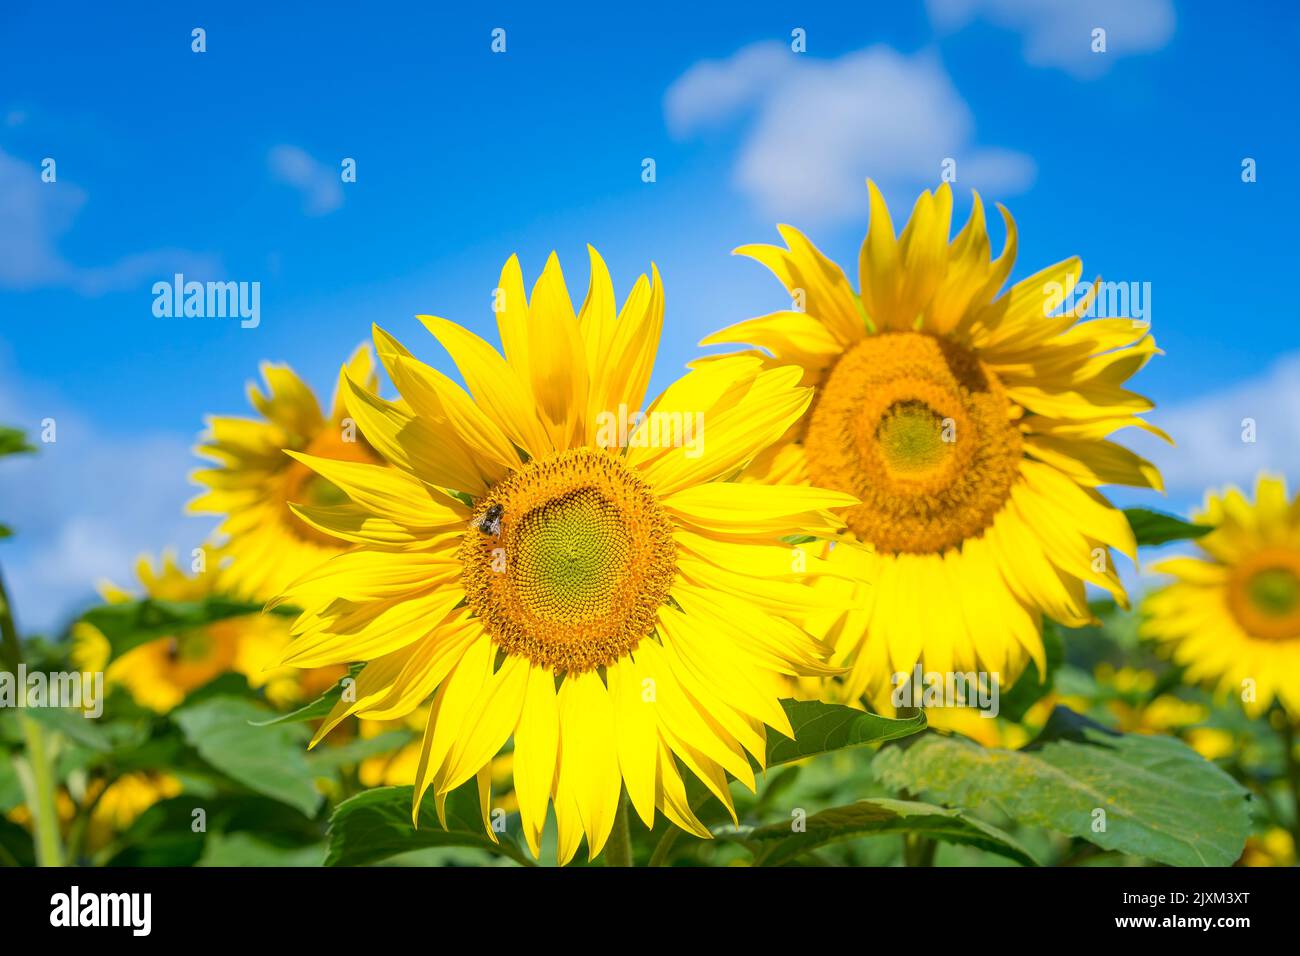 front view close-up sunflower head in a field of sunflowers and a blue sky background. Two bees sitting on the flower. Stock Photo